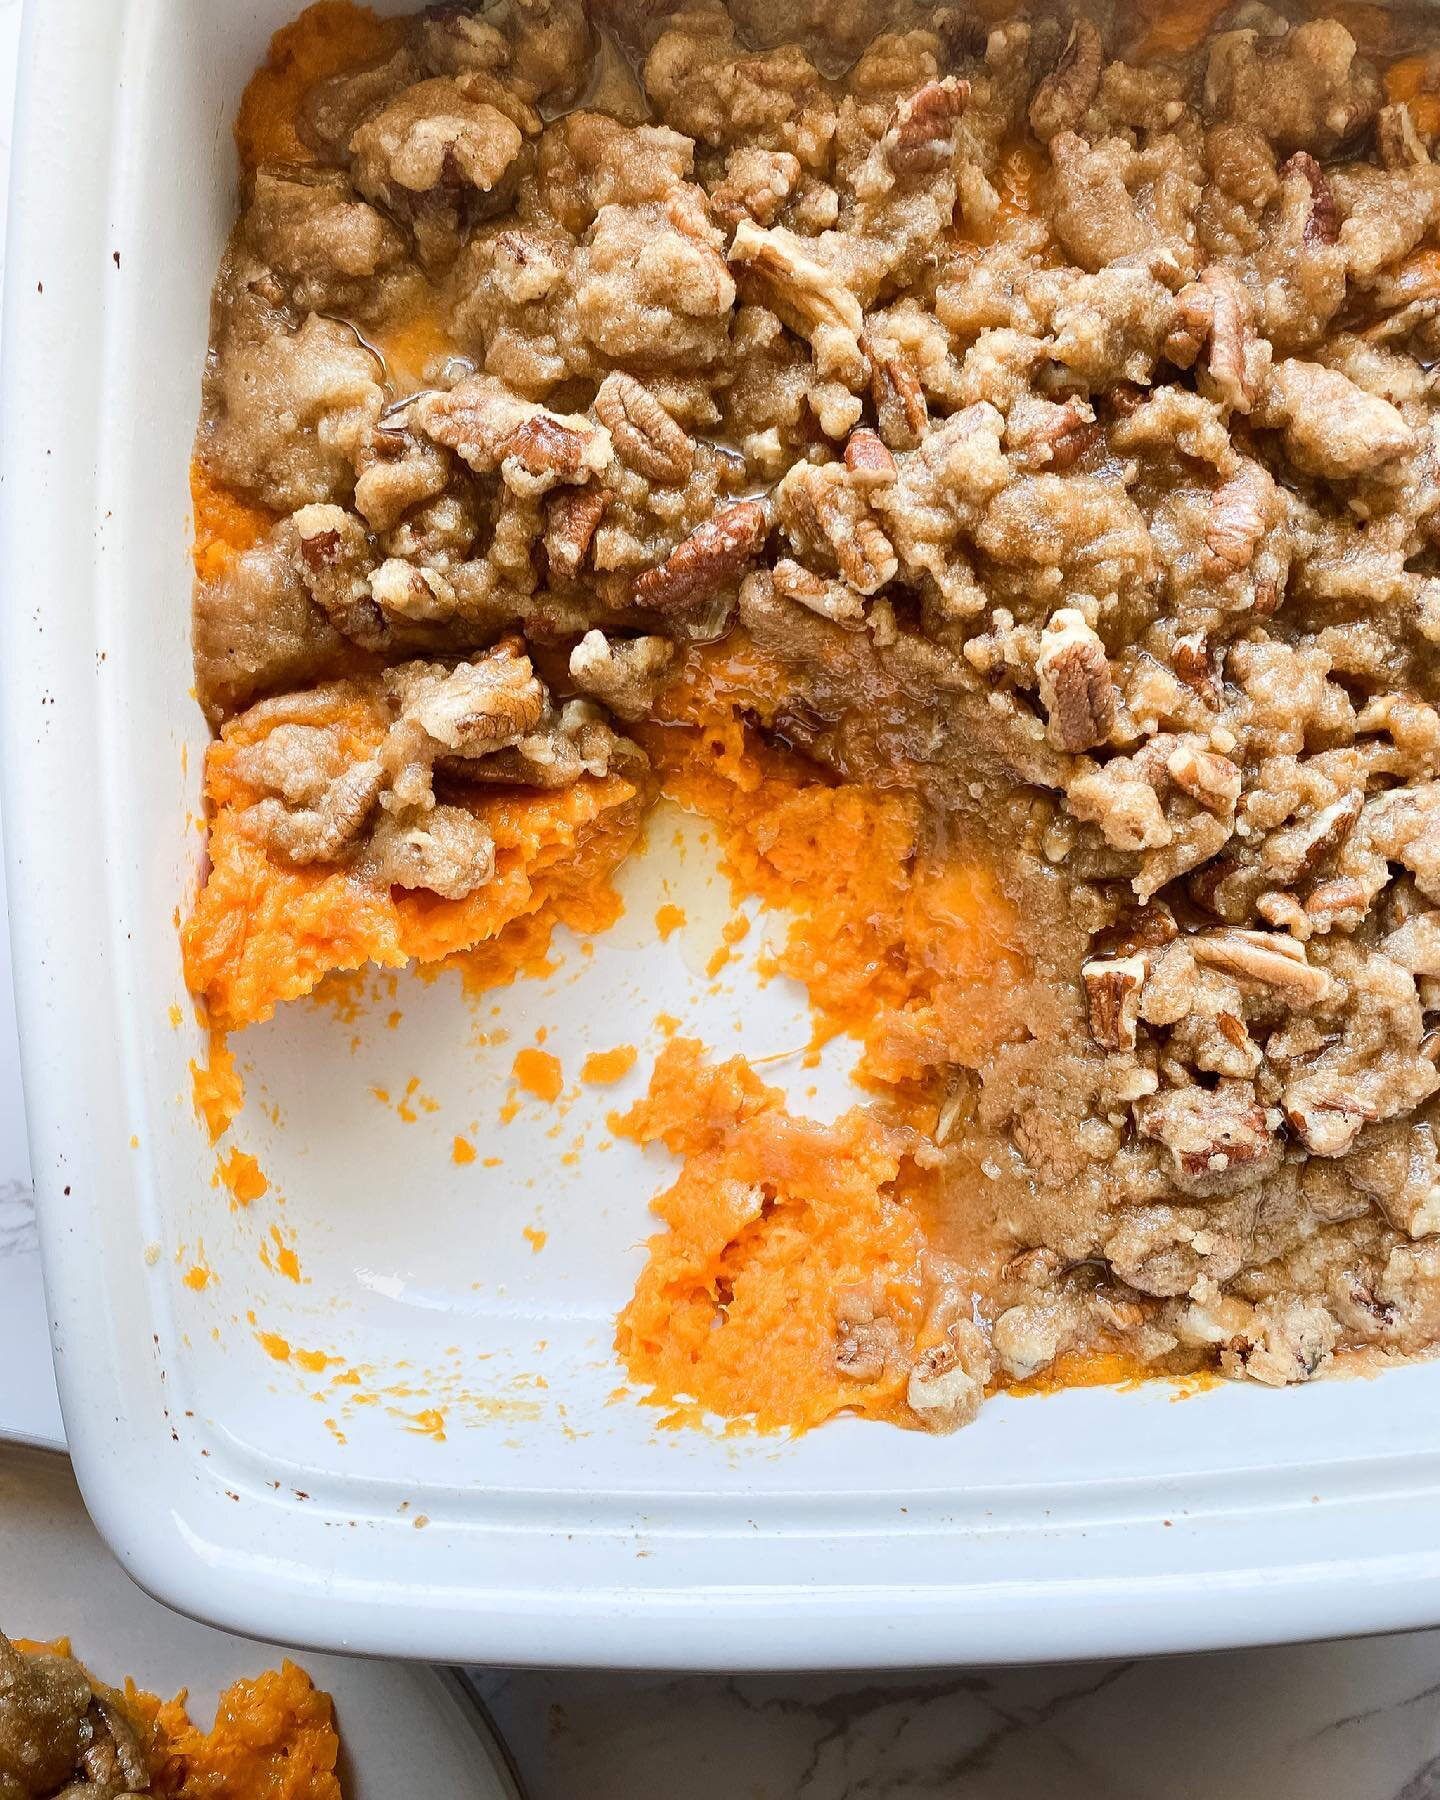 sweet potato casserole anytime of the year 👏🏼👏🏼👏🏼 #amiright 🍠 I developed this recipe for @mashedfood and made it gluten free using @pamelasproducts gluten free flour 👍🏼